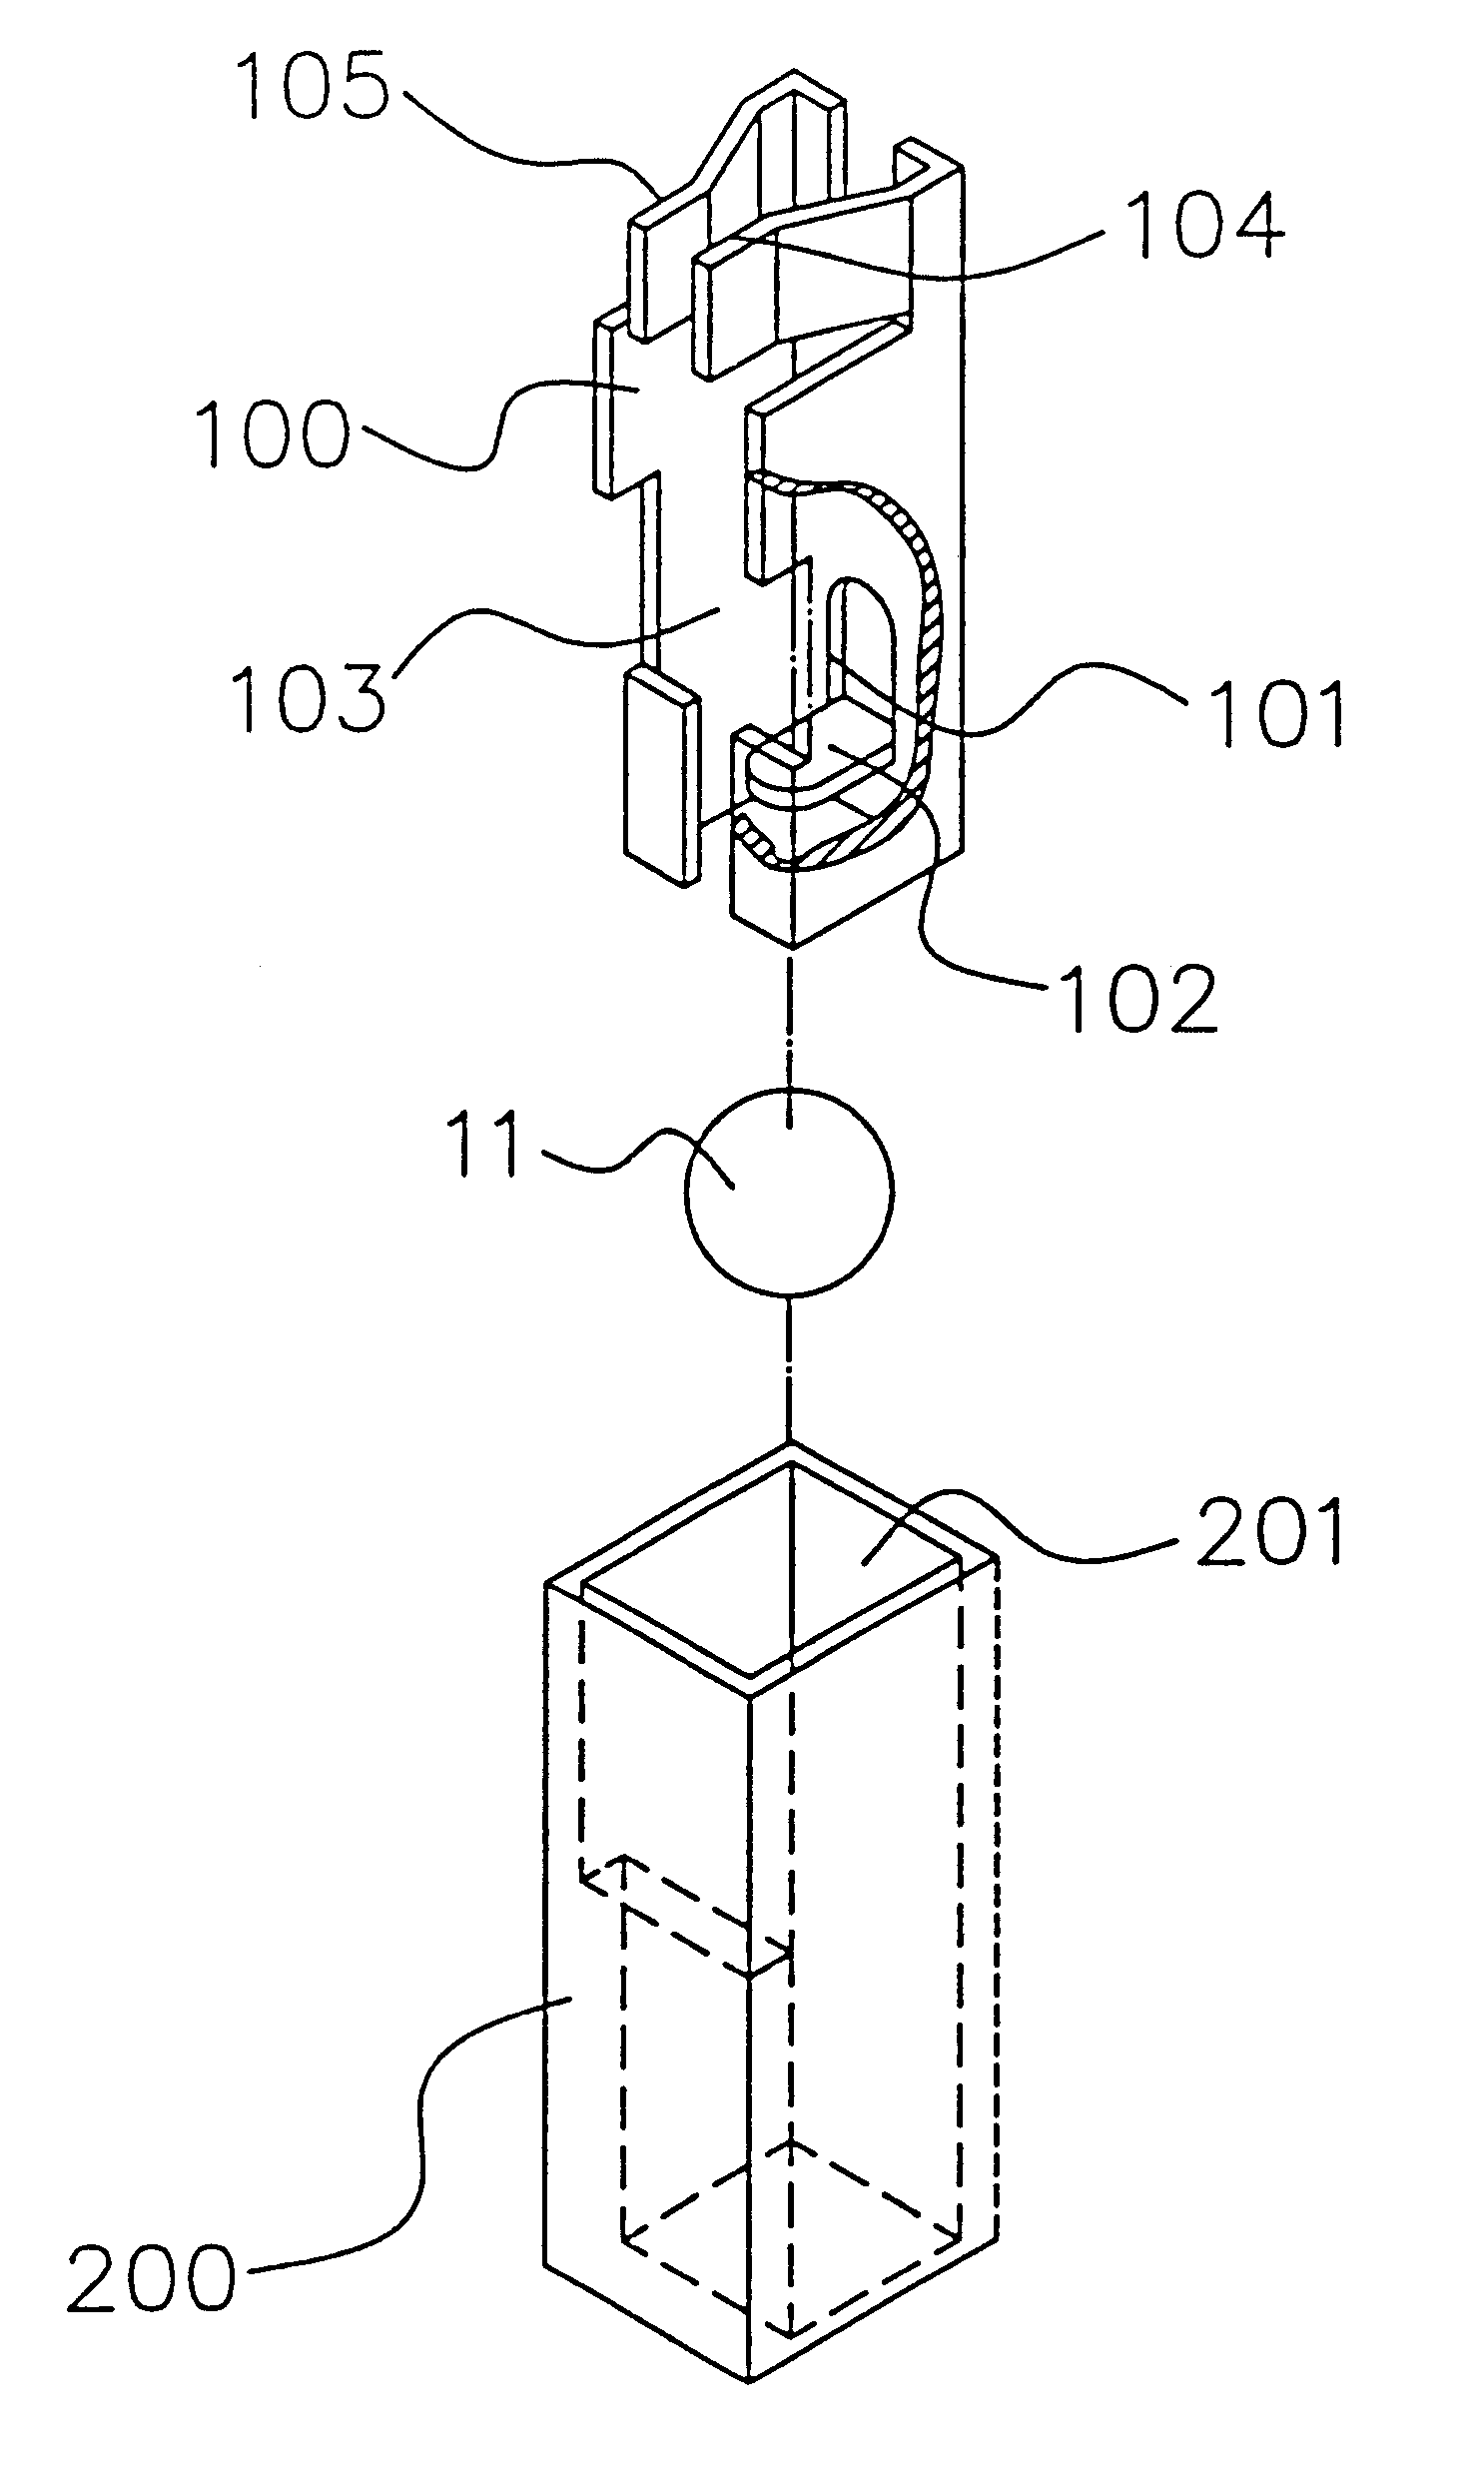 Structure of a ball grid array IC socket connection with solder ball